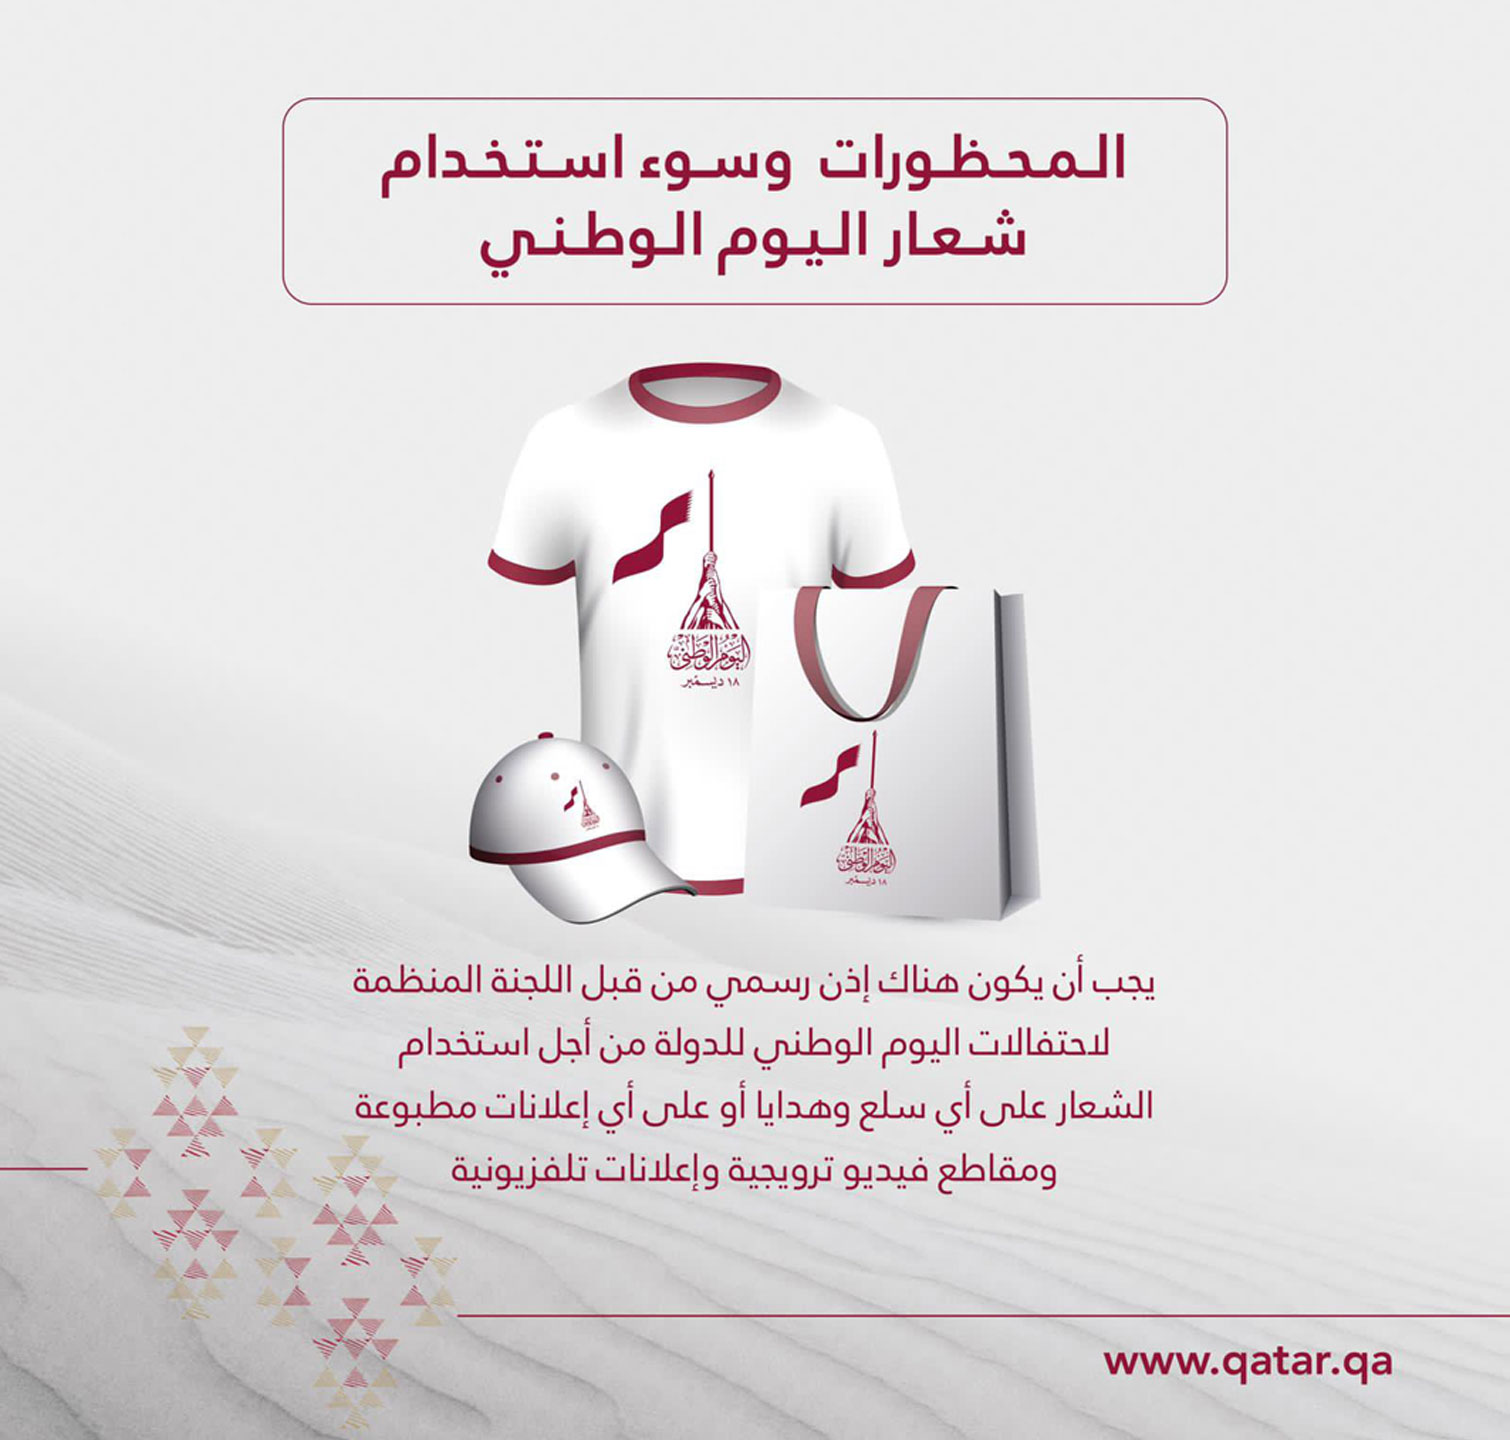 Obtaining official permission is a must for using the National Day logo